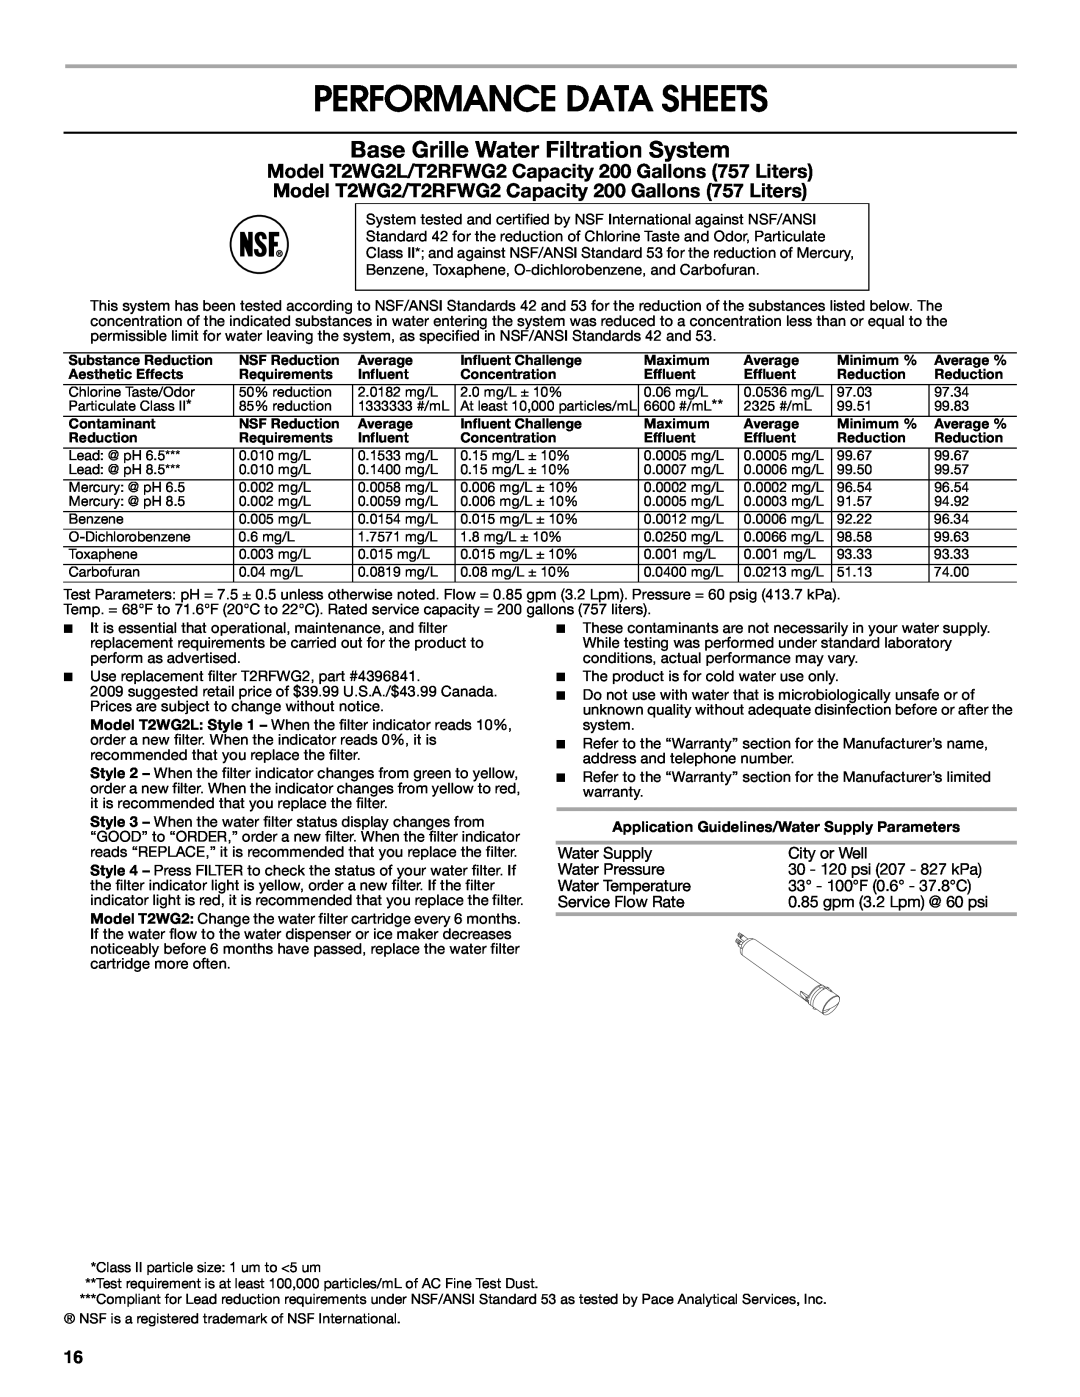 Jenn-Air W10231365B manual Performance Data Sheets, Base Grille Water Filtration System 